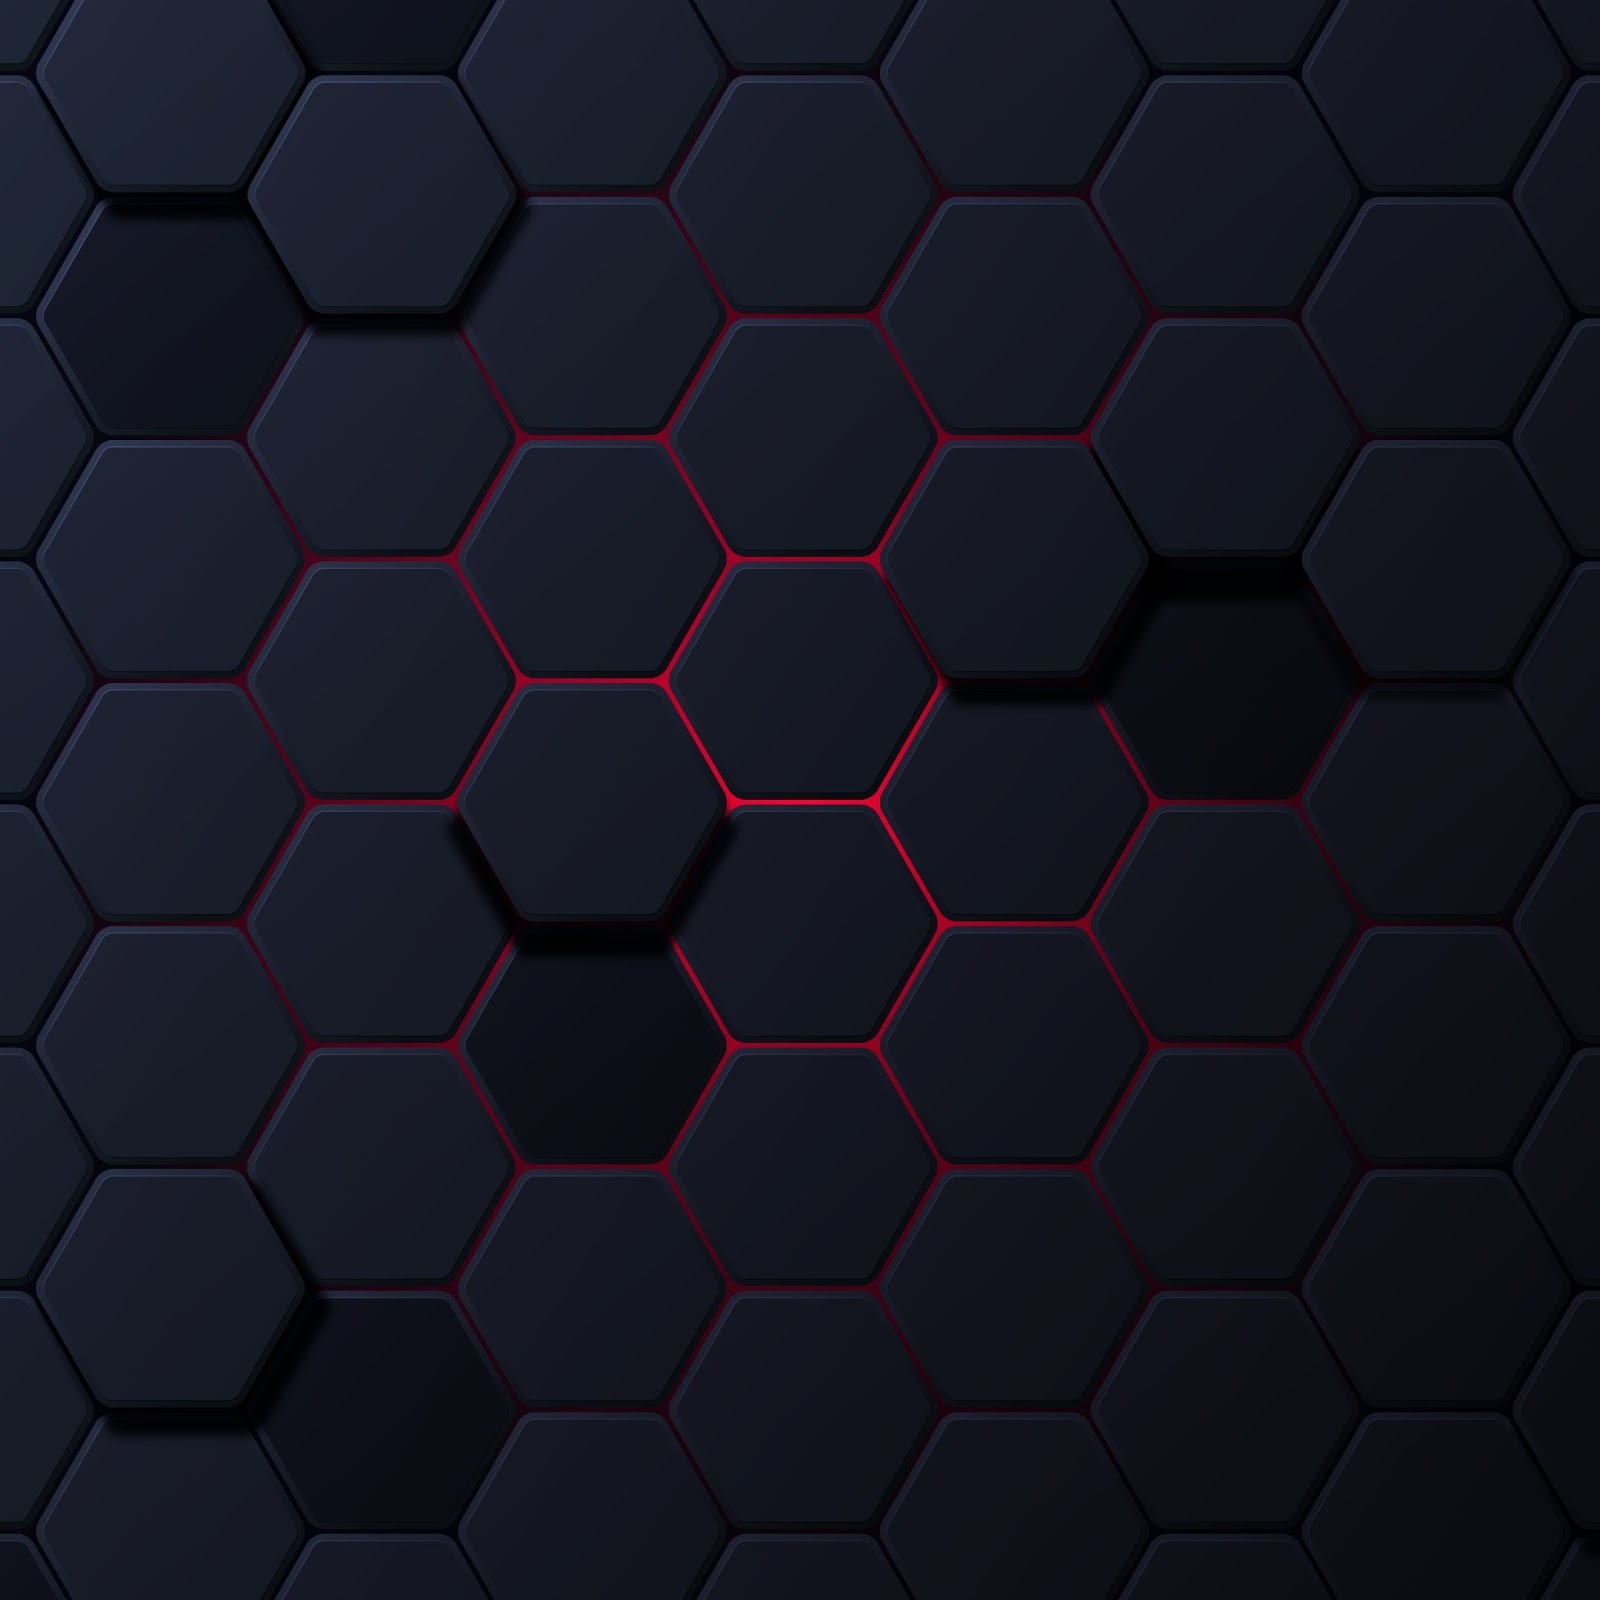 Hexagon, Abstract, 3D Abstract, Minimalism, Simple Background 4K Wallpaper